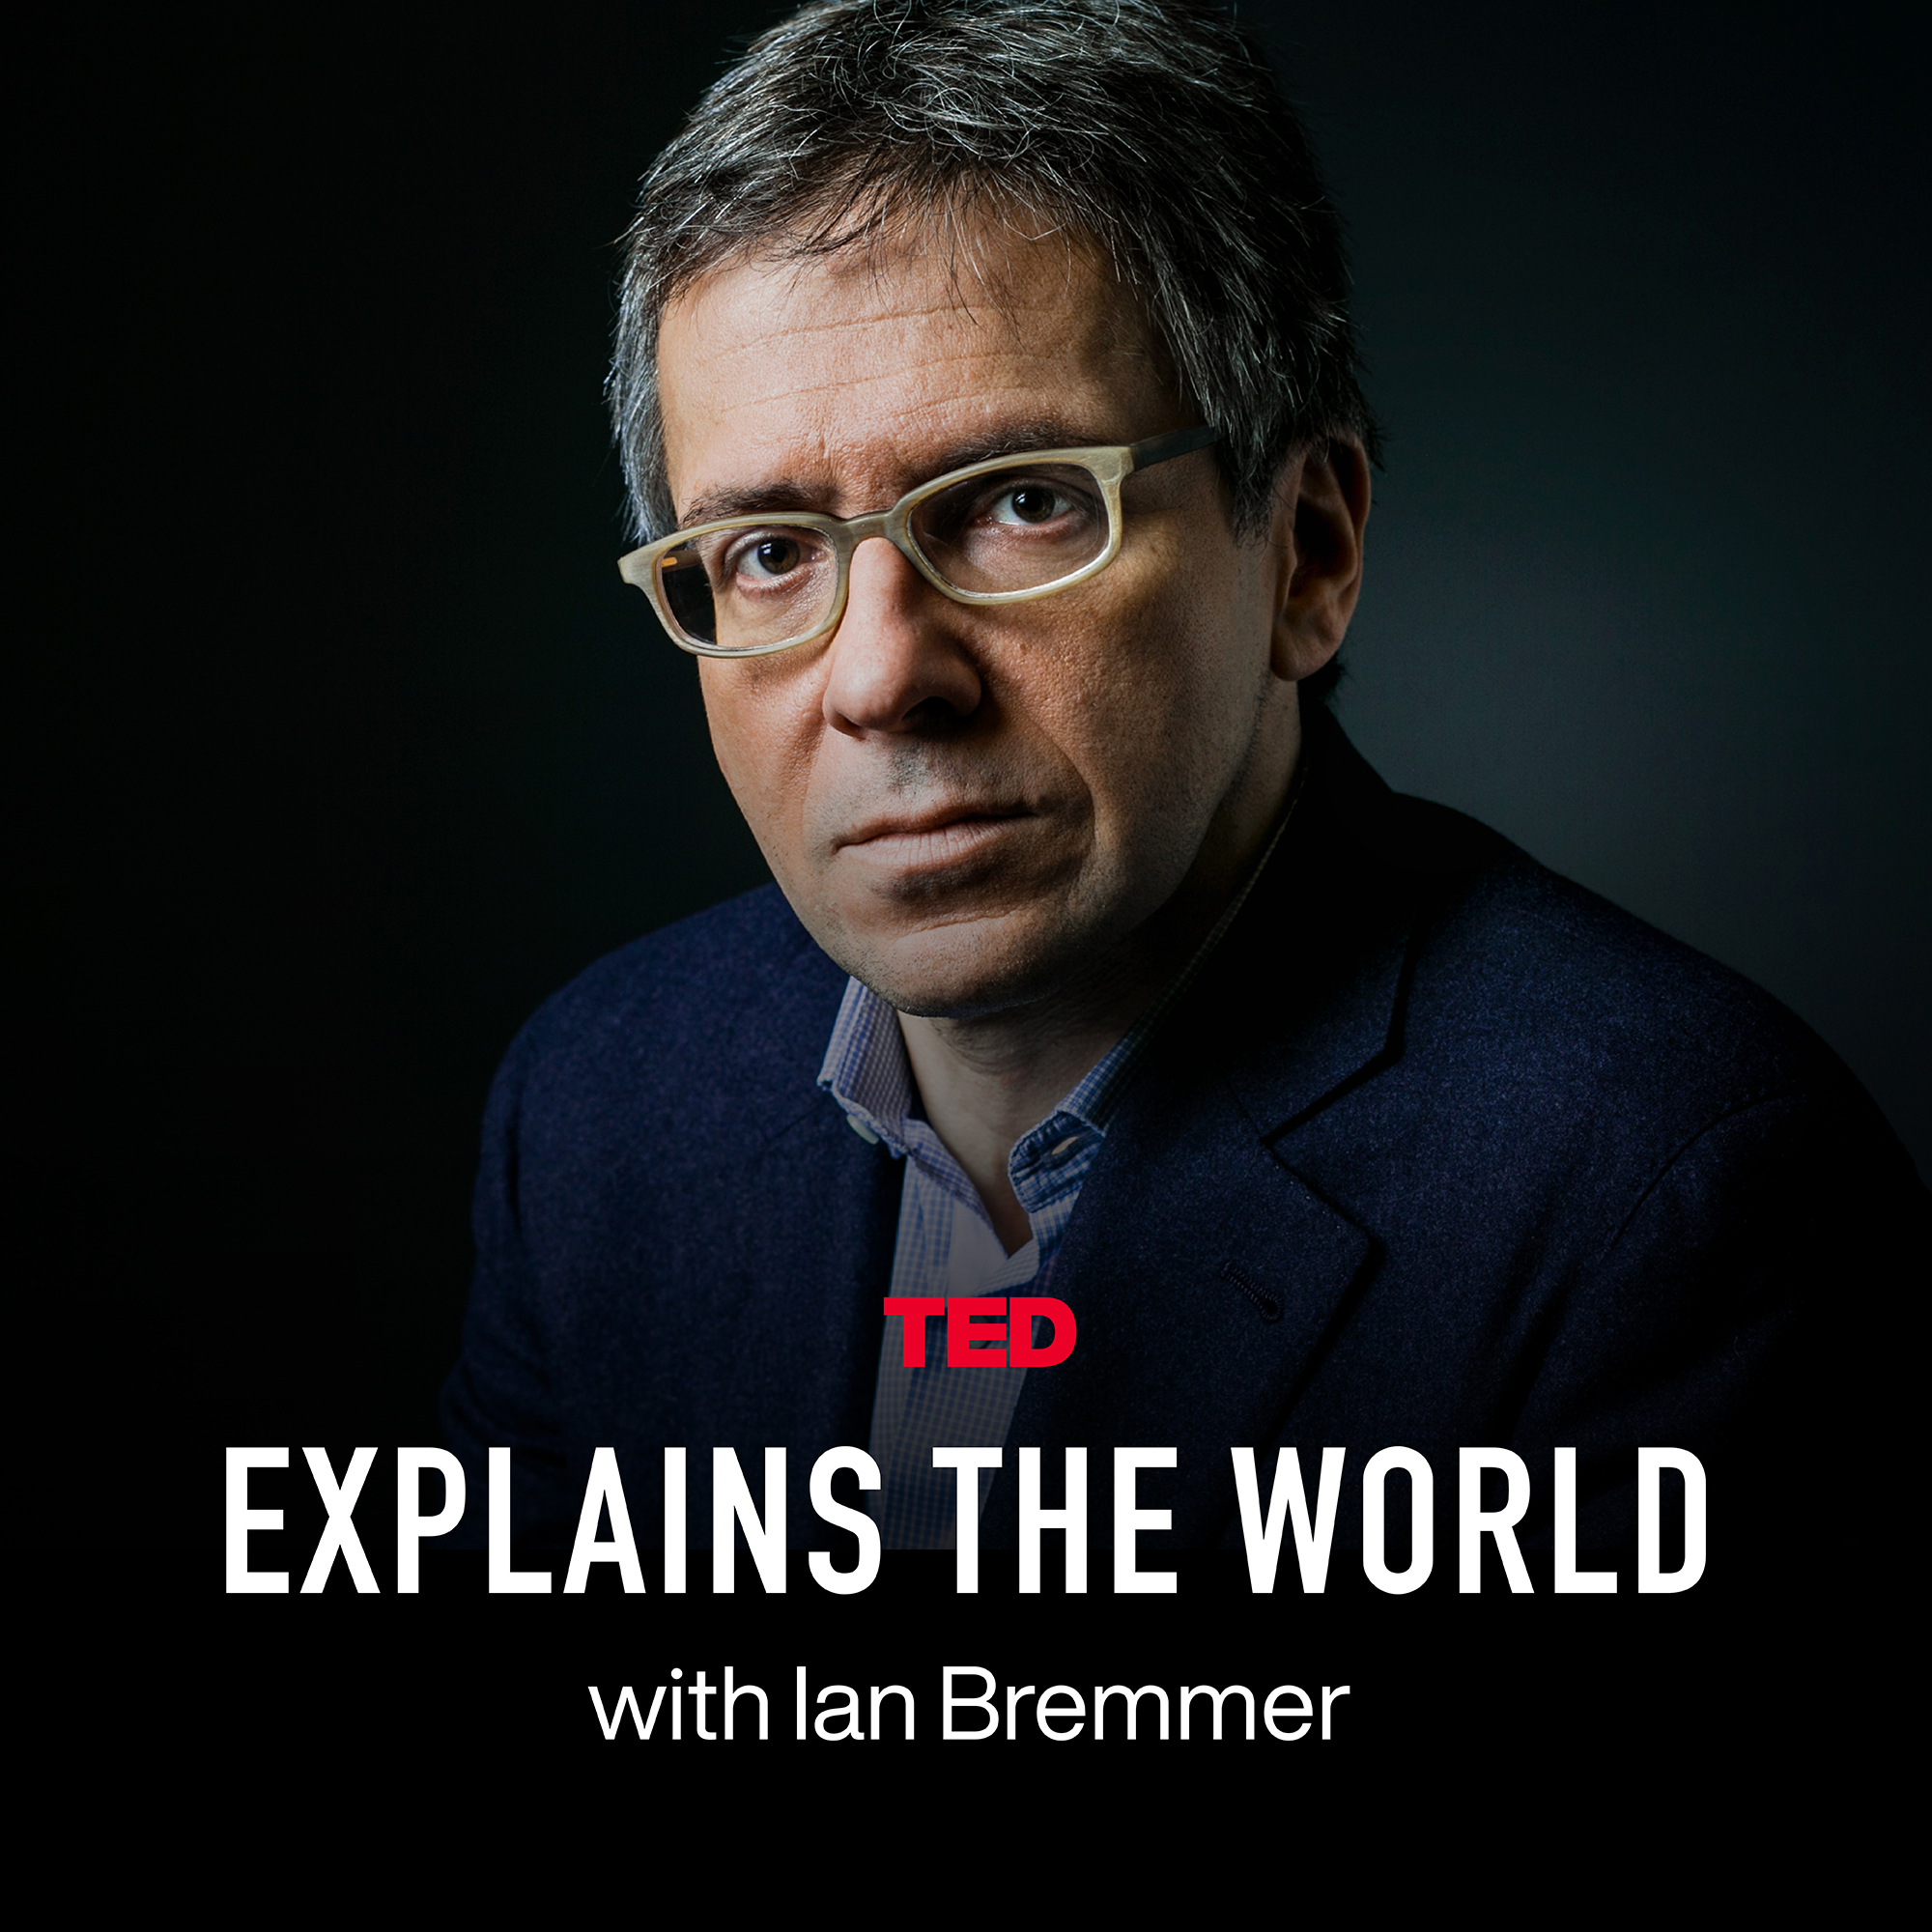 TED Explains the World with Ian Bremmer